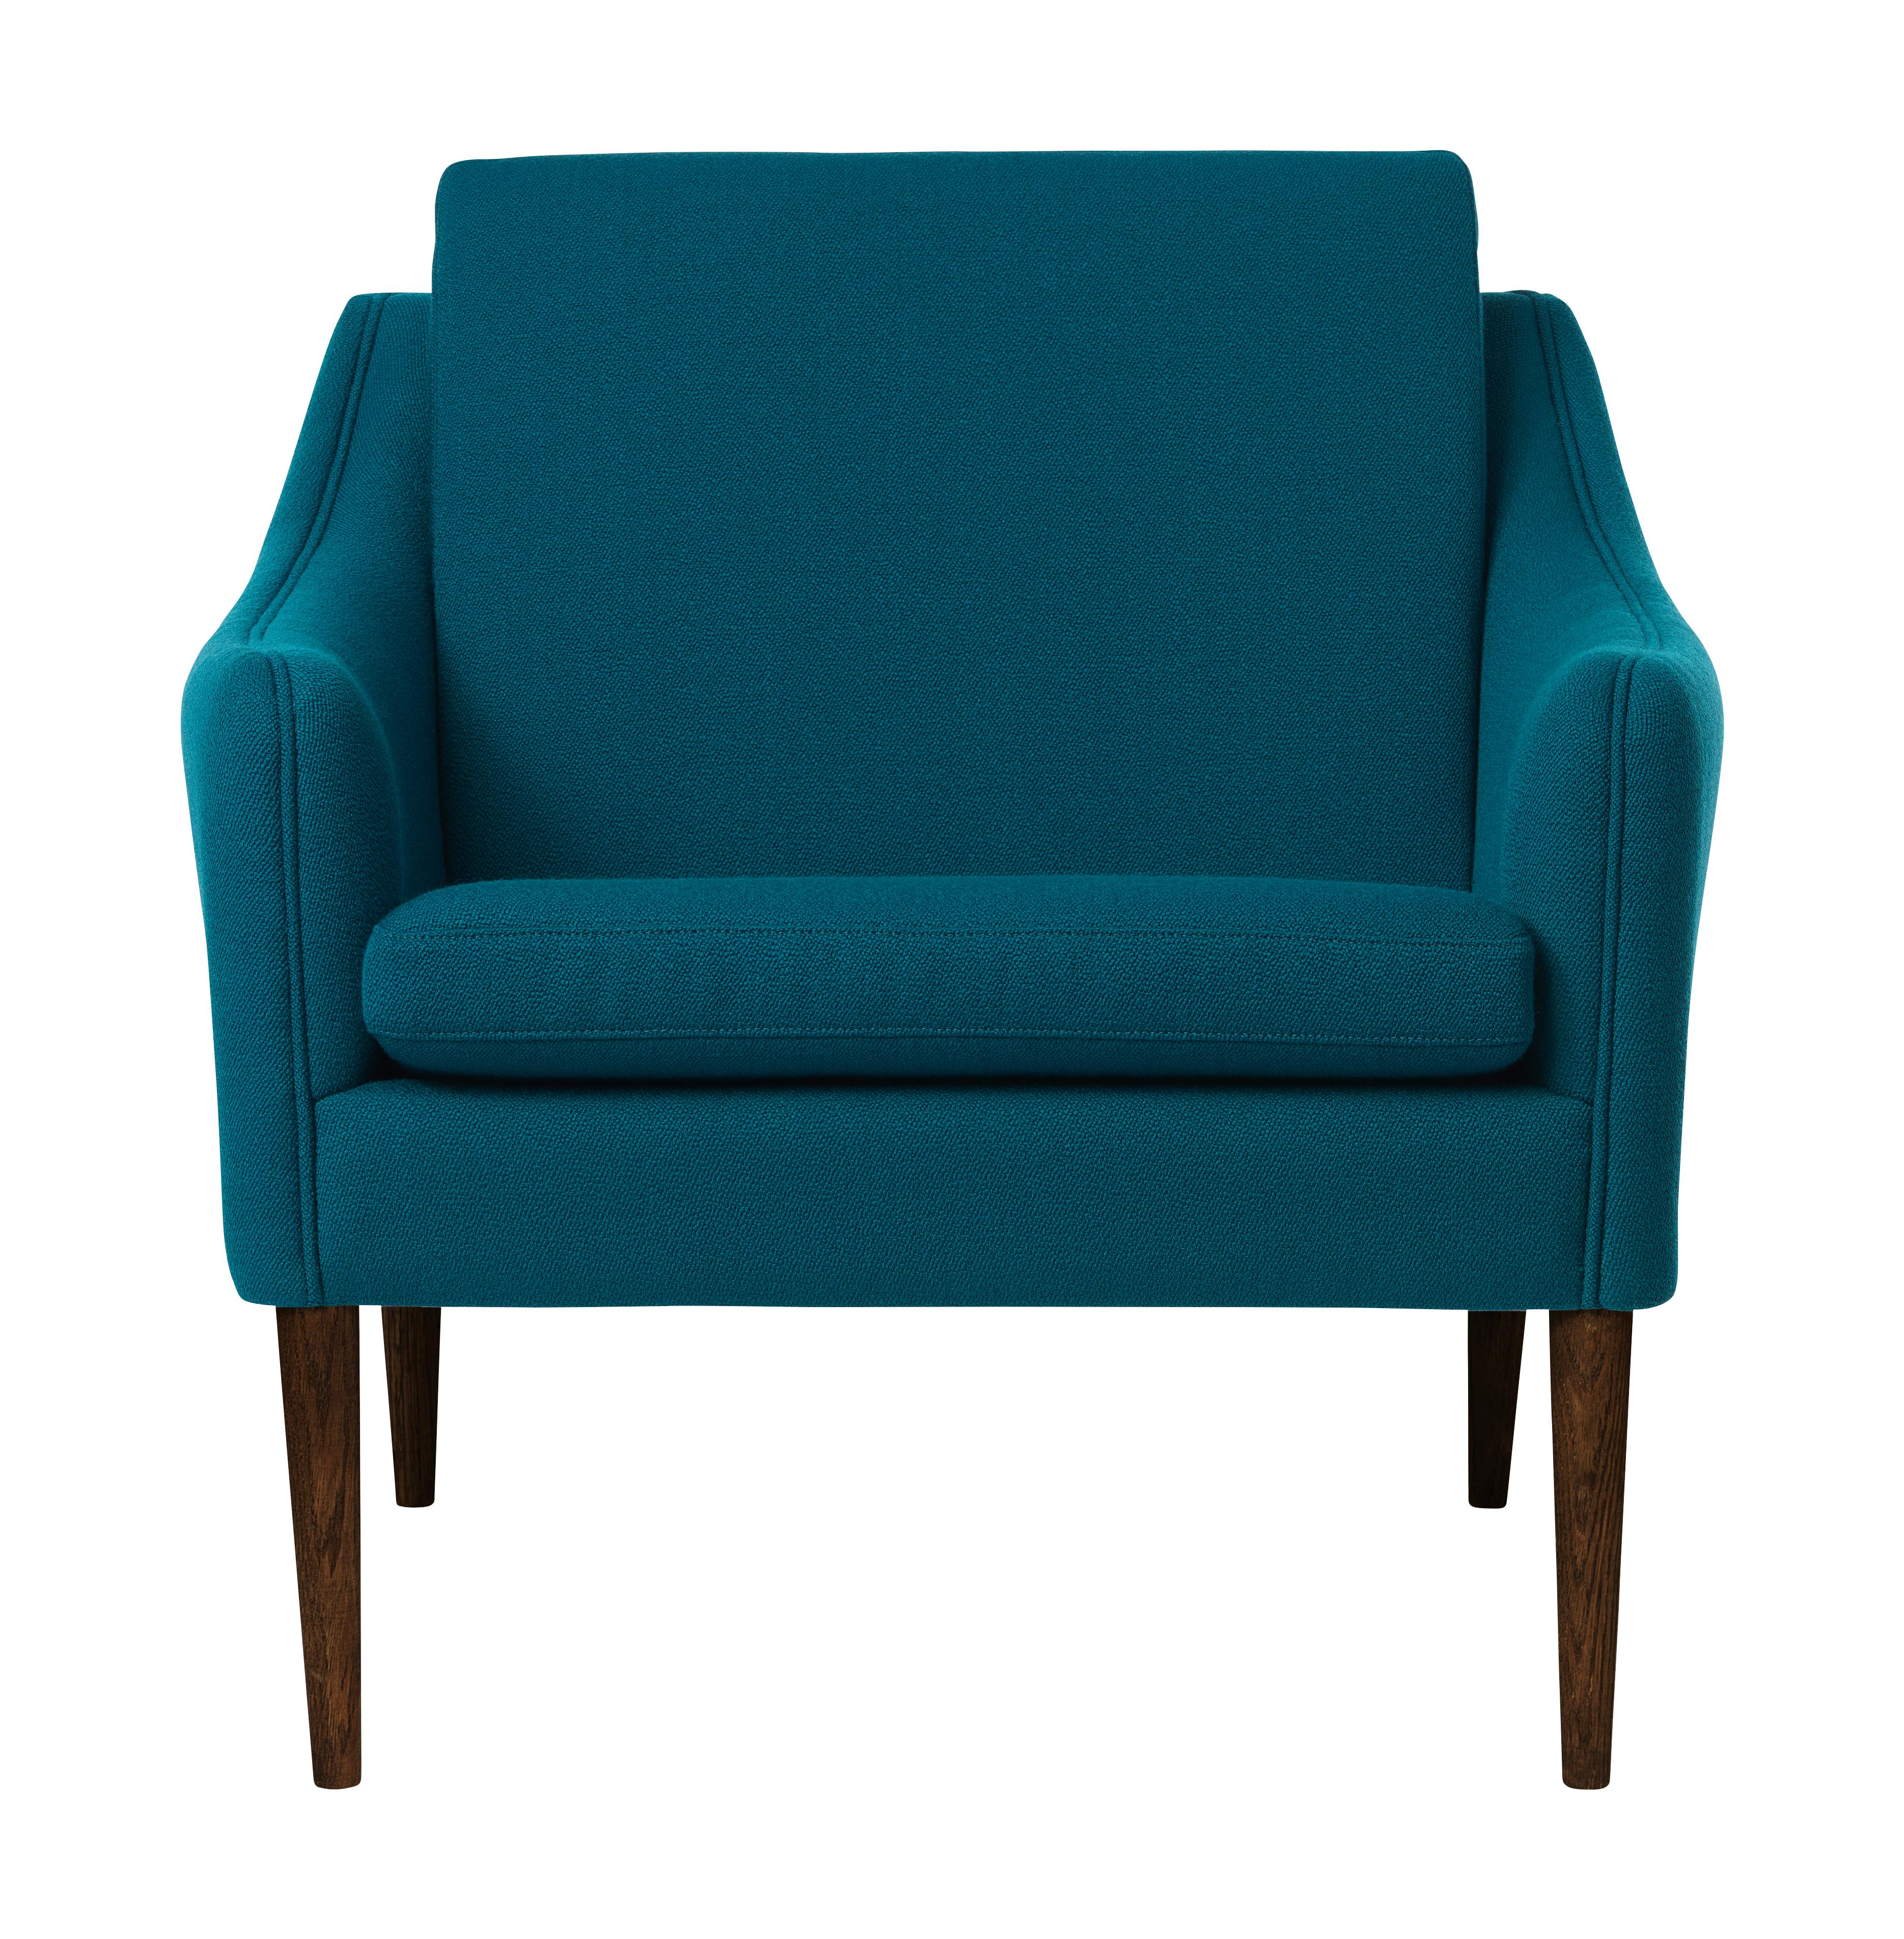 For Sale: Blue (Vidar872) Mr. Olsen Lounge Chair with Walnut Legs, by Hans Olsen from Warm Nordic